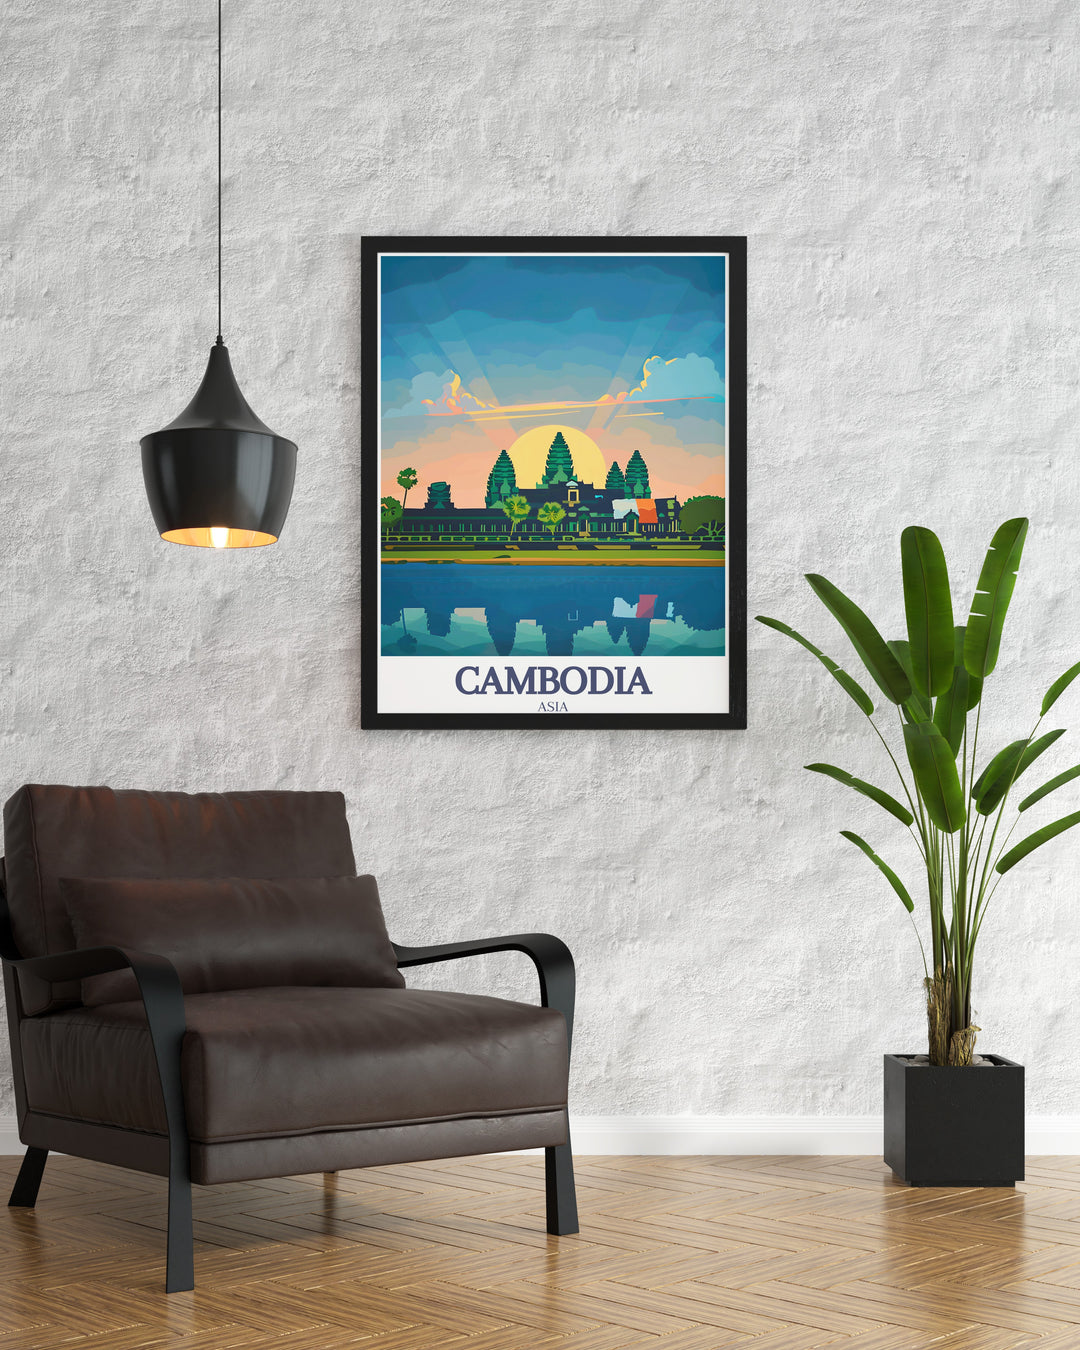 Enhance your decor with this Angkor Wat Khmer travel poster. Featuring the stunning Siem Reap landmark, this piece is perfect for history enthusiasts and art lovers alike. The detailed illustration captures the ancient temples architectural brilliance.